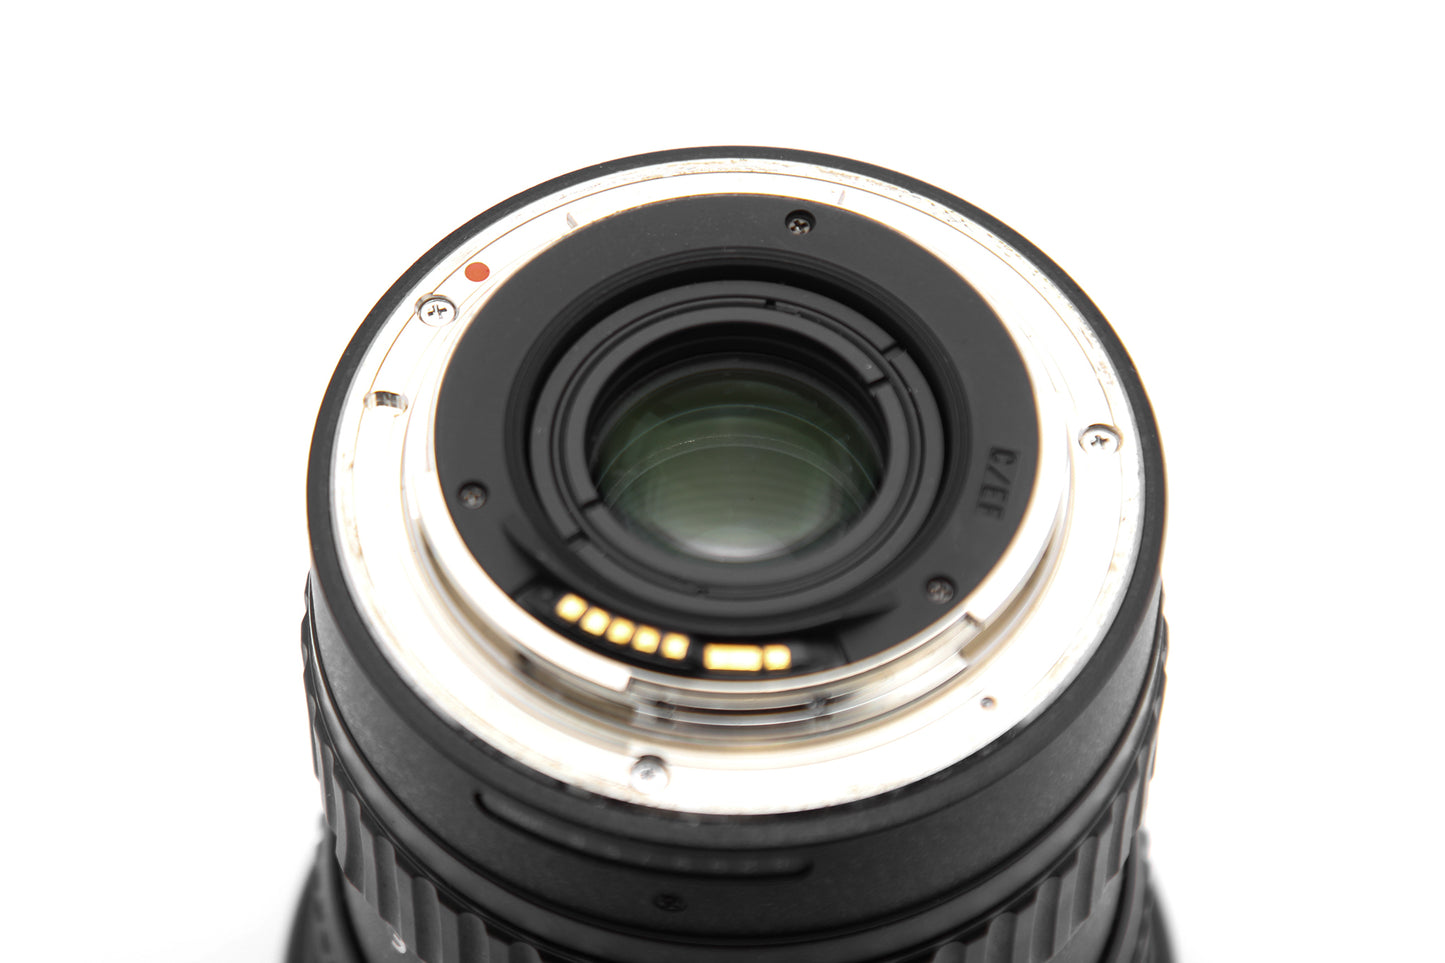 Used Tokina 11-16mm f/2.8 Pro DX Lens for Canon